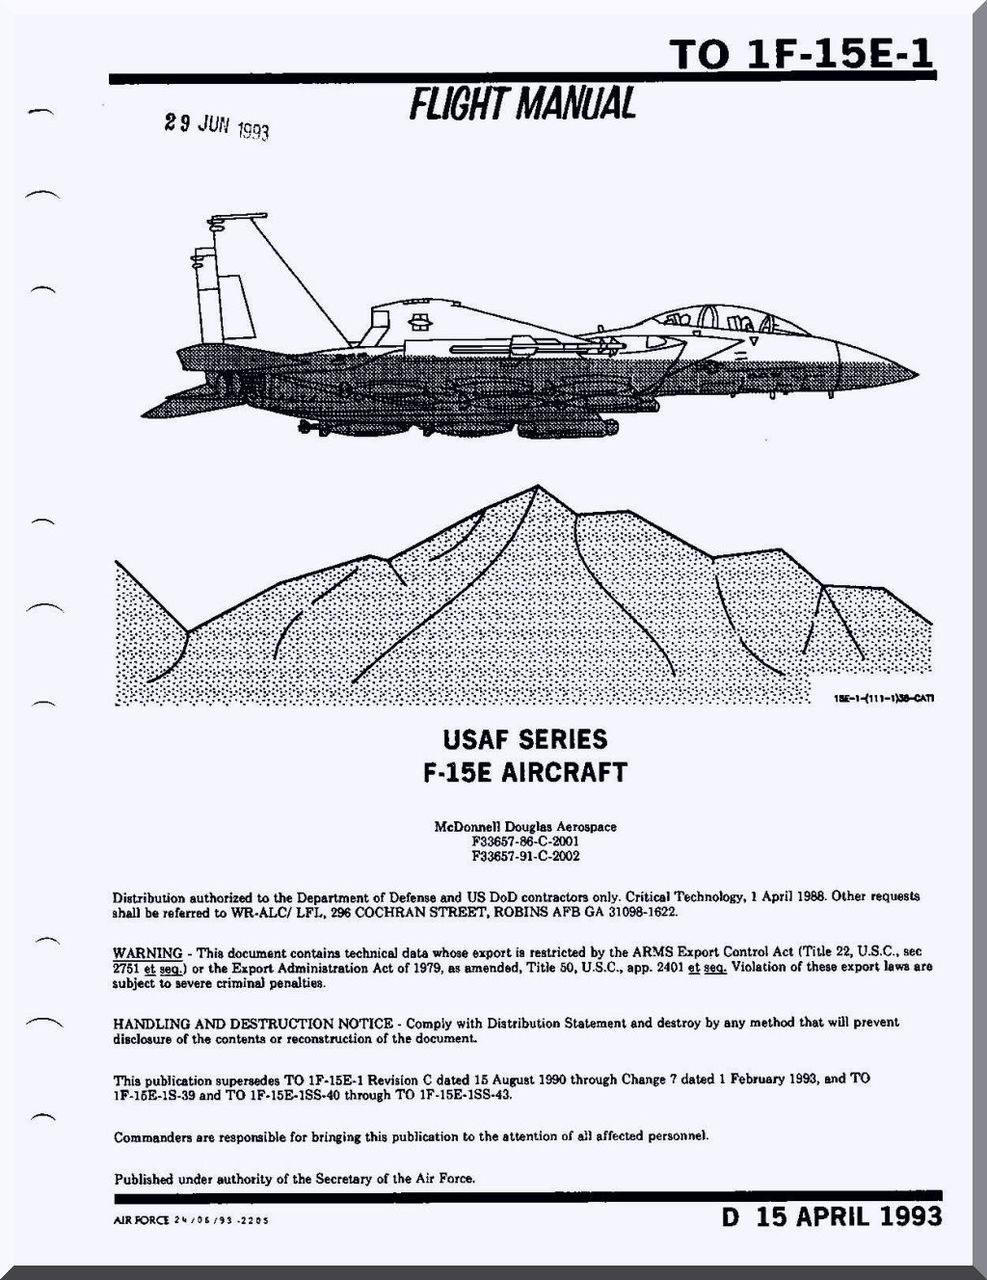 Mc Donnell Douglas F-15 E Aircraft Flight Manual T.O. 1F-15E-1 , 1993 -  Aircraft Reports - Aircraft Manuals - Aircraft Helicopter Engines  Propellers Blueprints Publications